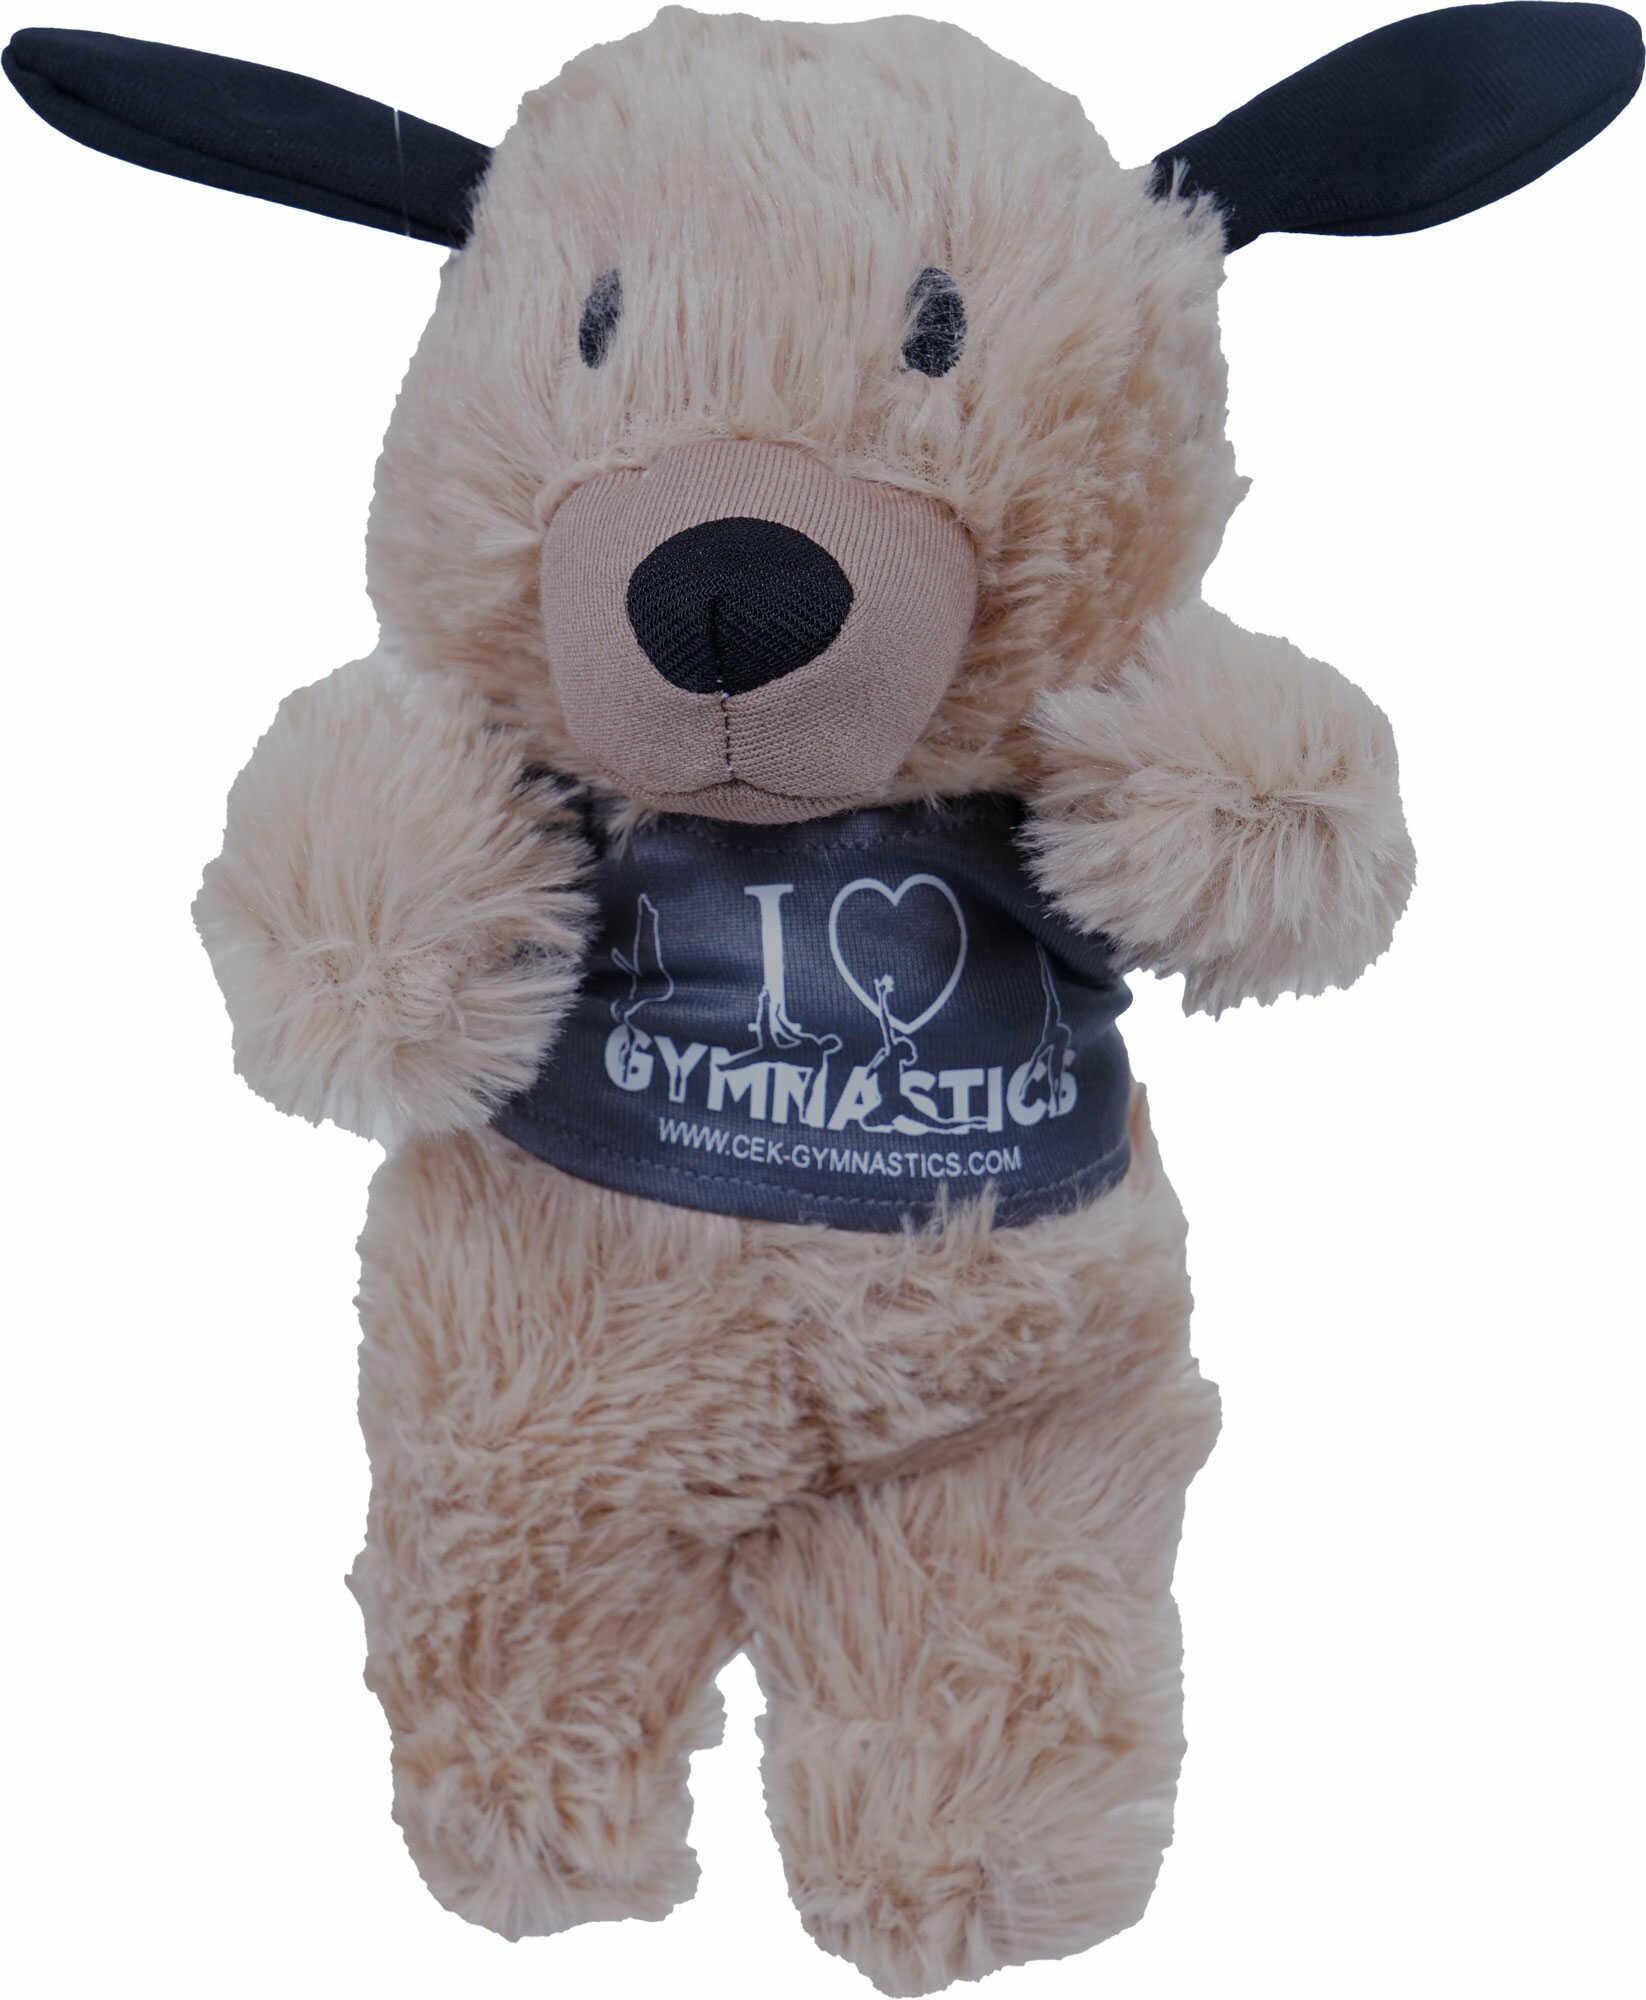 Fluffy dog cuddly toy with promo t-shirt